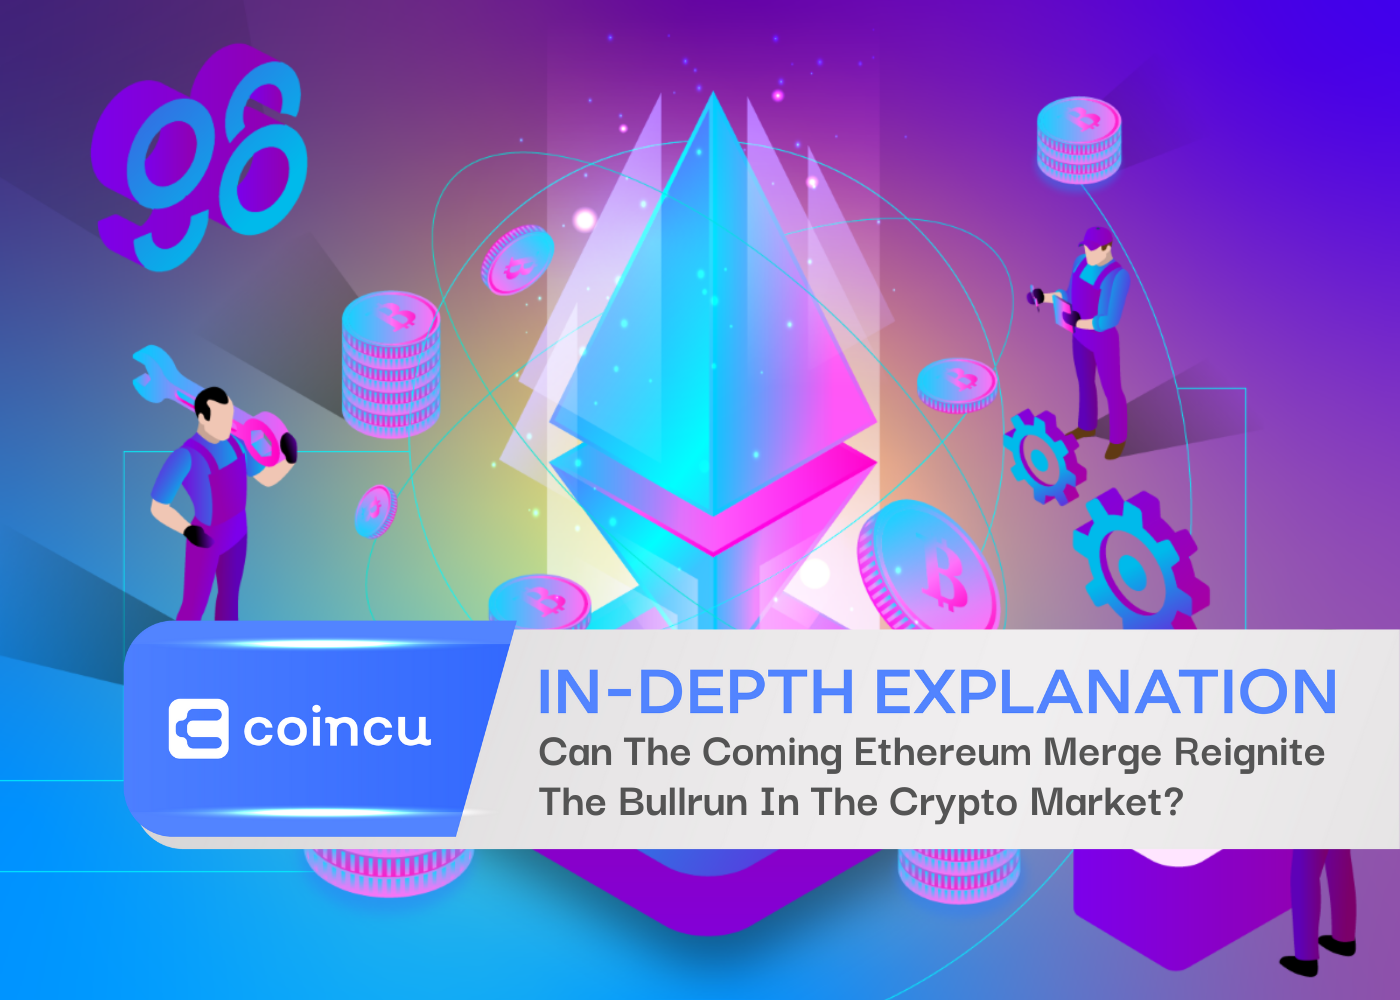 Can The Coming Ethereum Merge Reignite